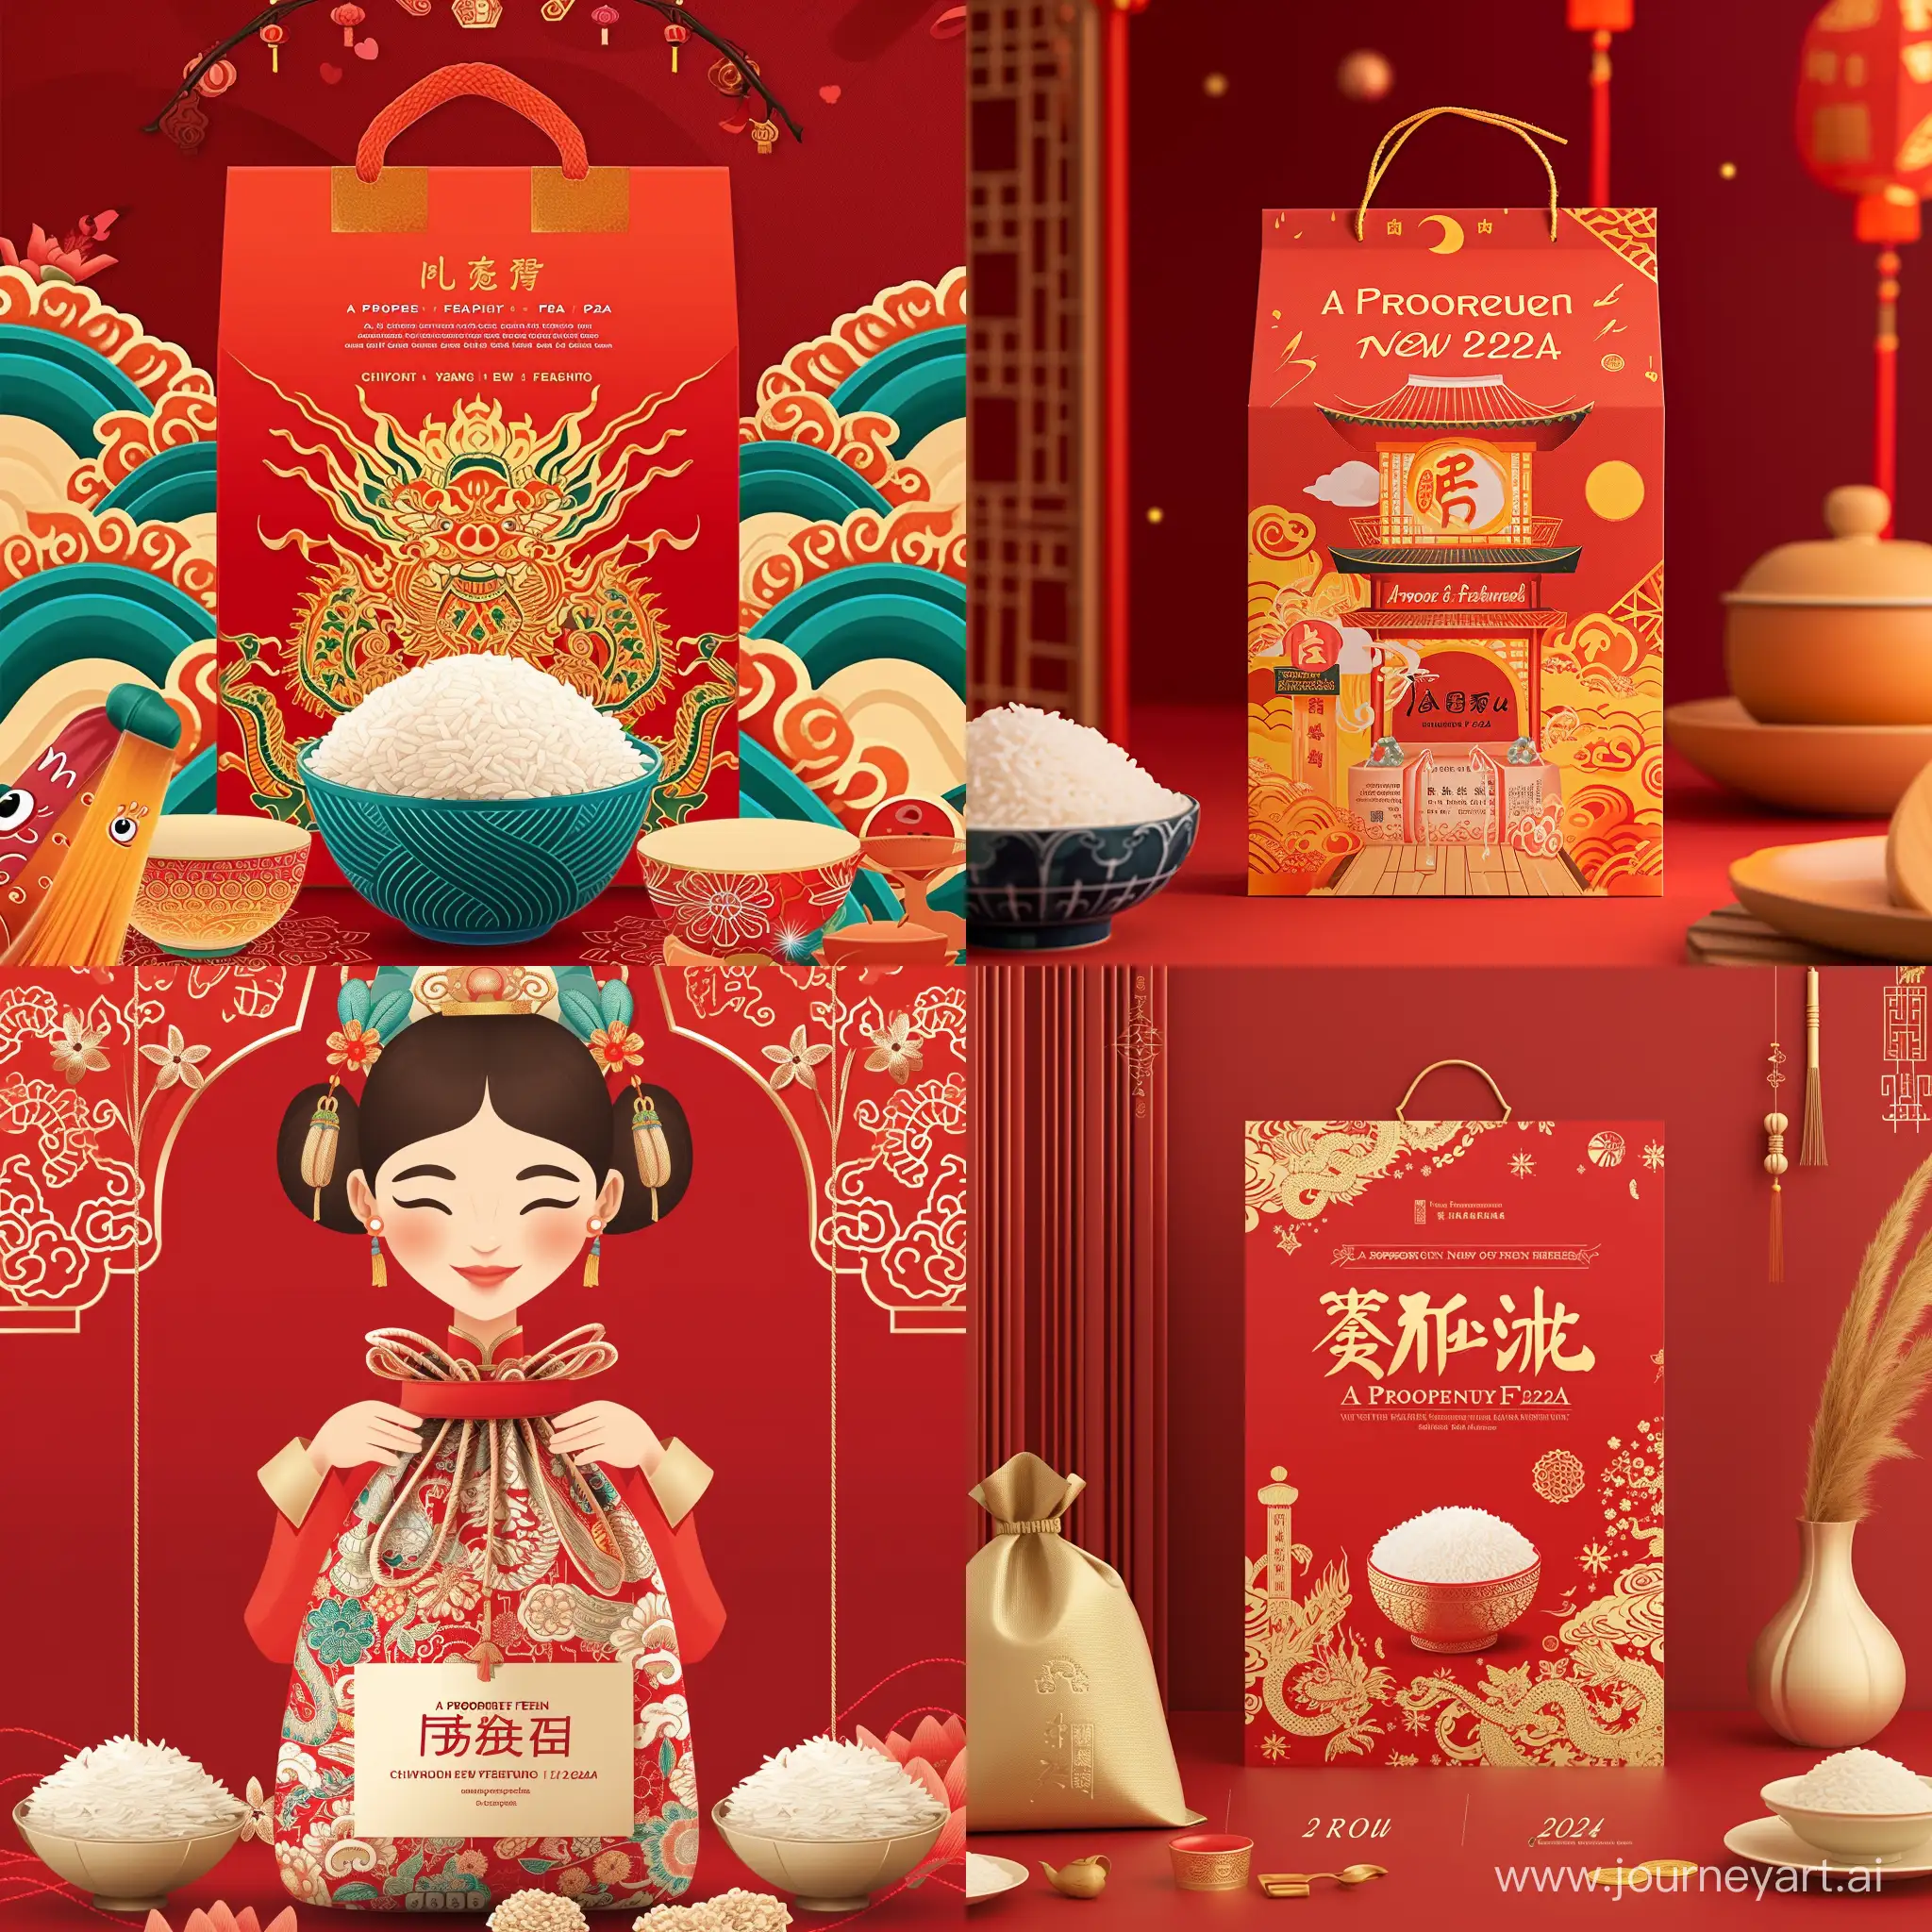 A-Prosperous-Feast-for-Charity-Asean-Retail-Franchise-Federation-Chinese-New-Year-2024-Lunch-Invitation